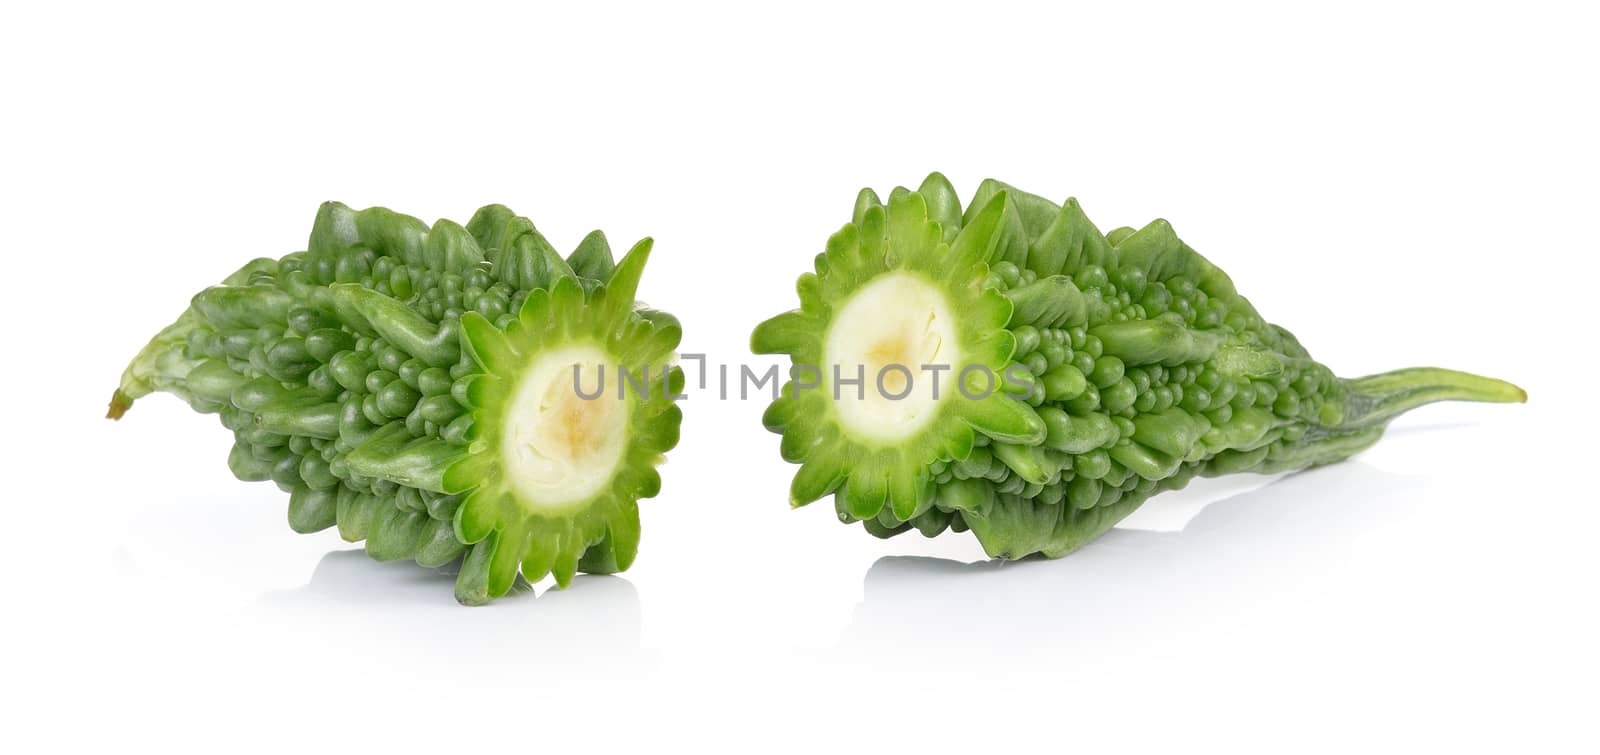 Bitter melon slices isolated on white background